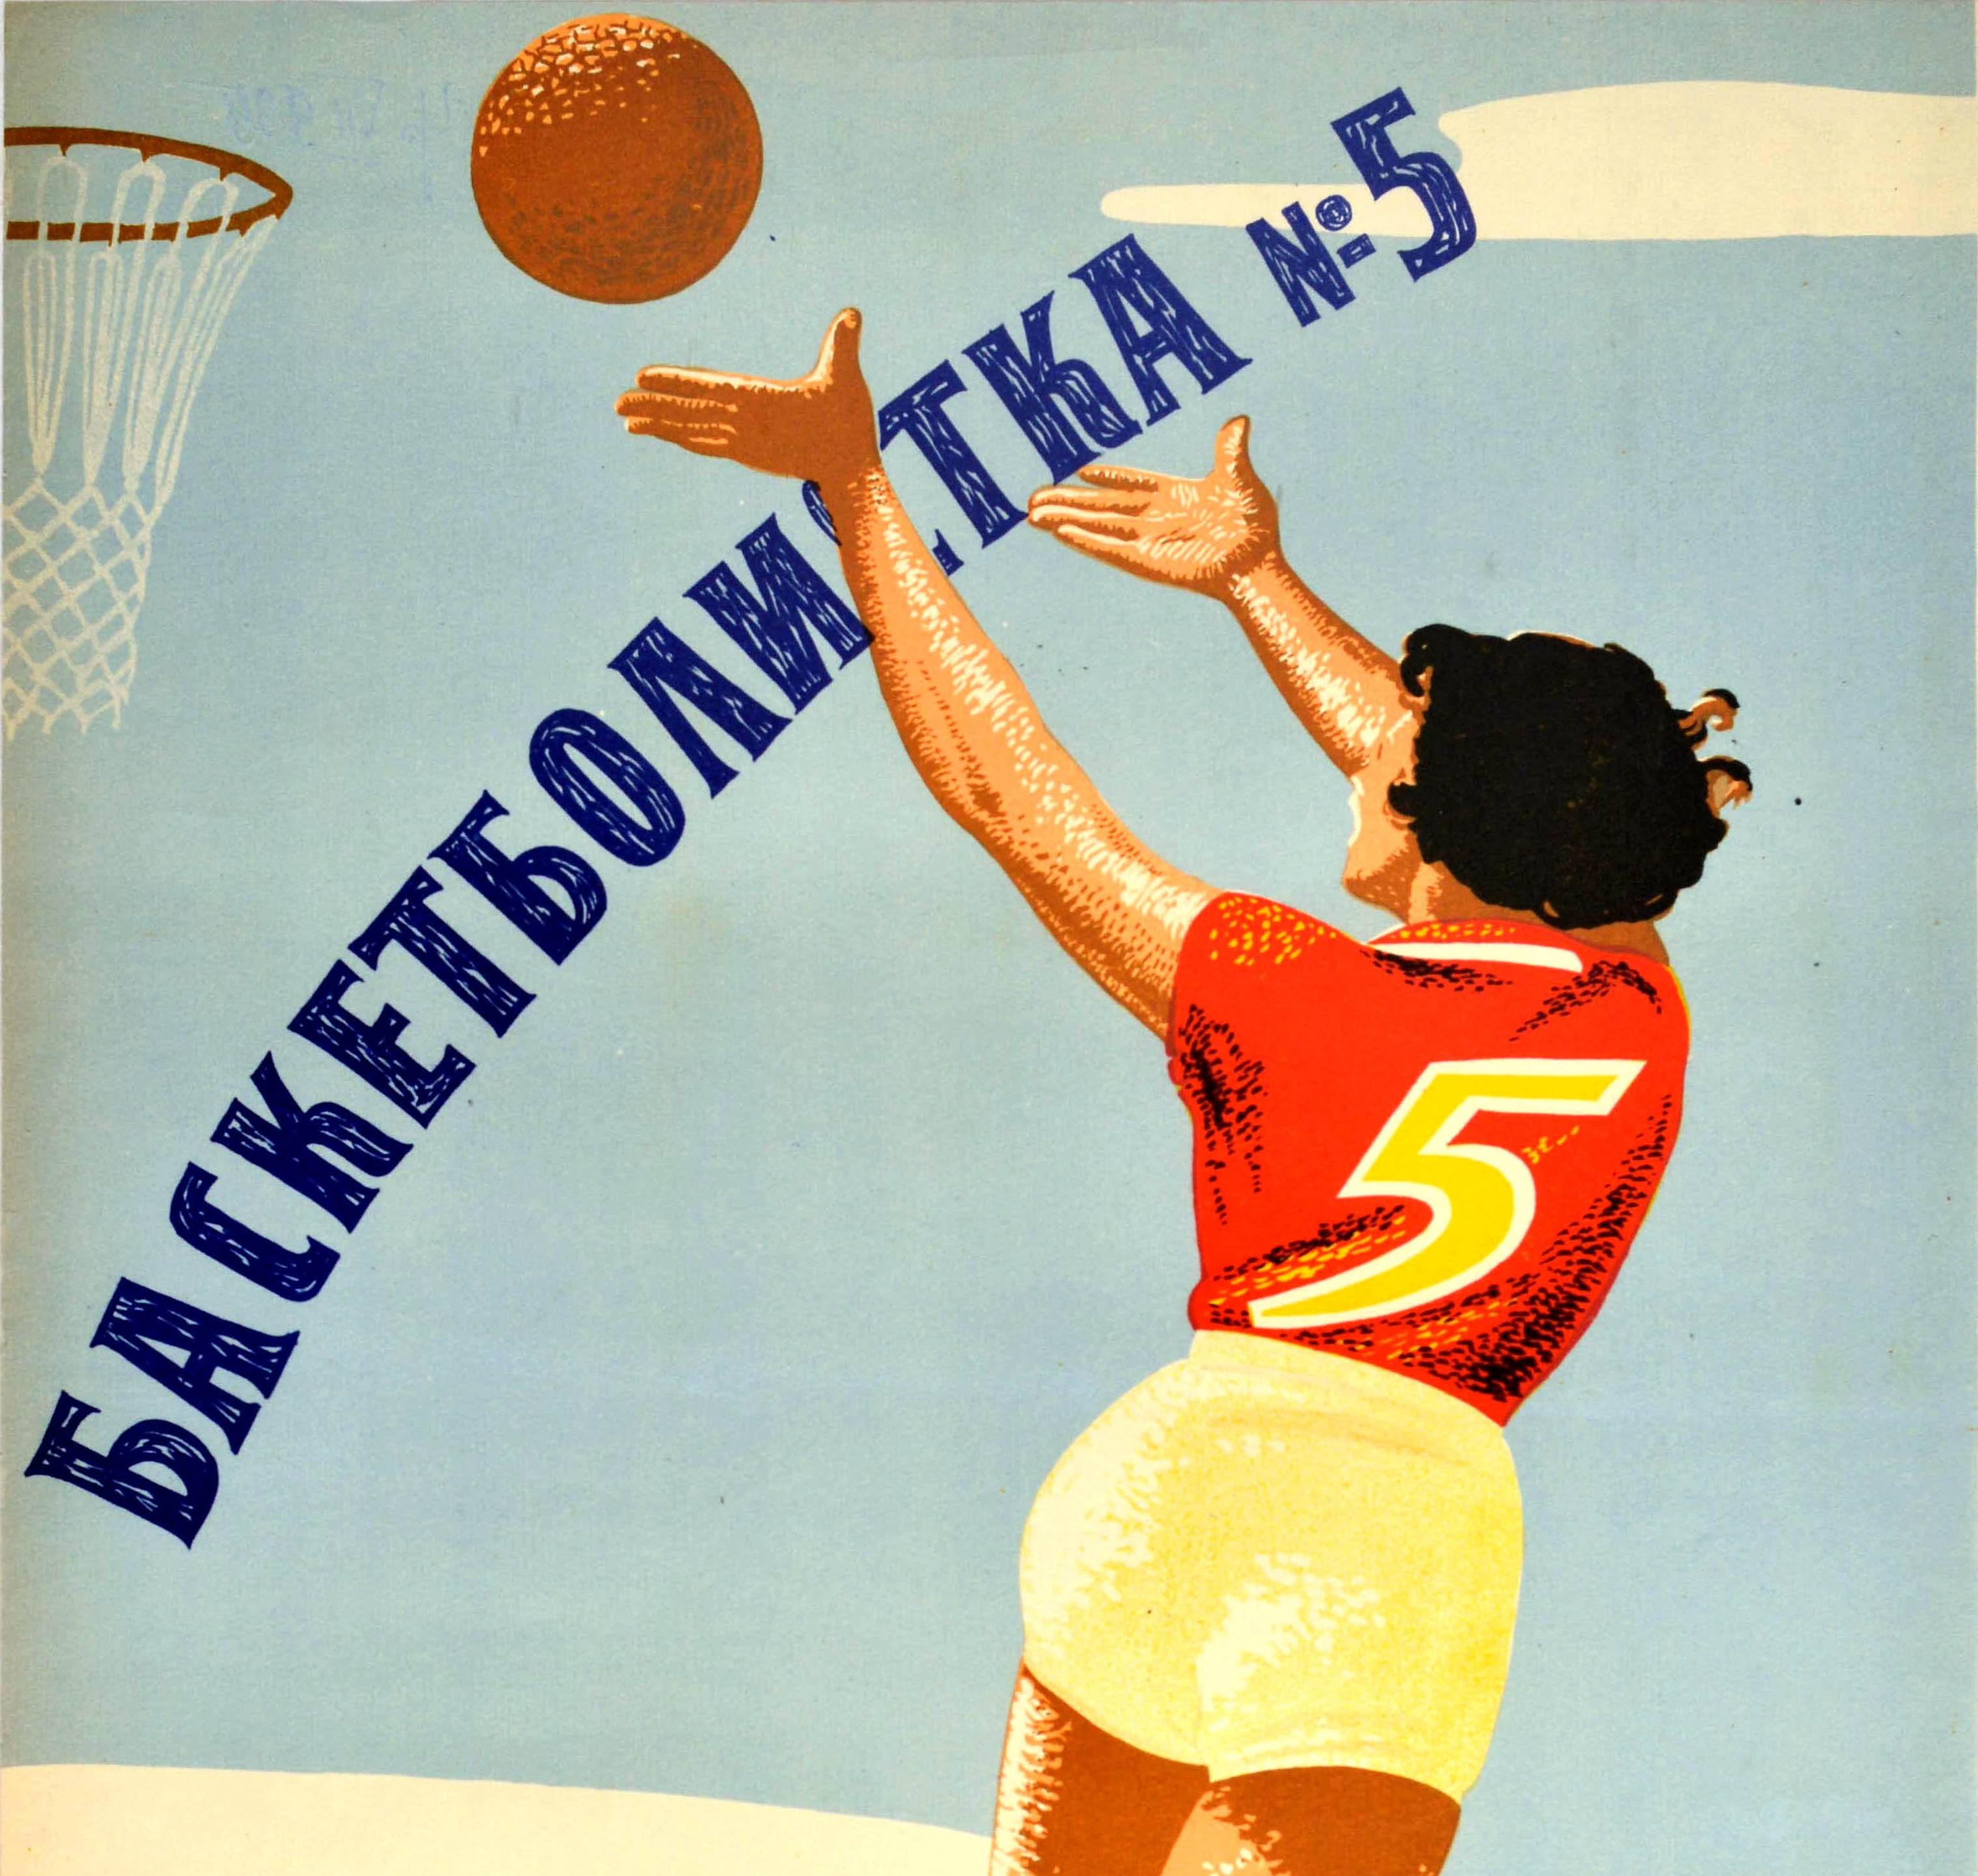 Original vintage Bulgarian release movie poster for a 1957 Chinese feature film - Woman Basketball Player No. 5 / ???????? ??????? ???? ?????????????? - directed and written by Xie Jin and starring Cao Qiwei with Liu Qiong and Qin Yi featuring a